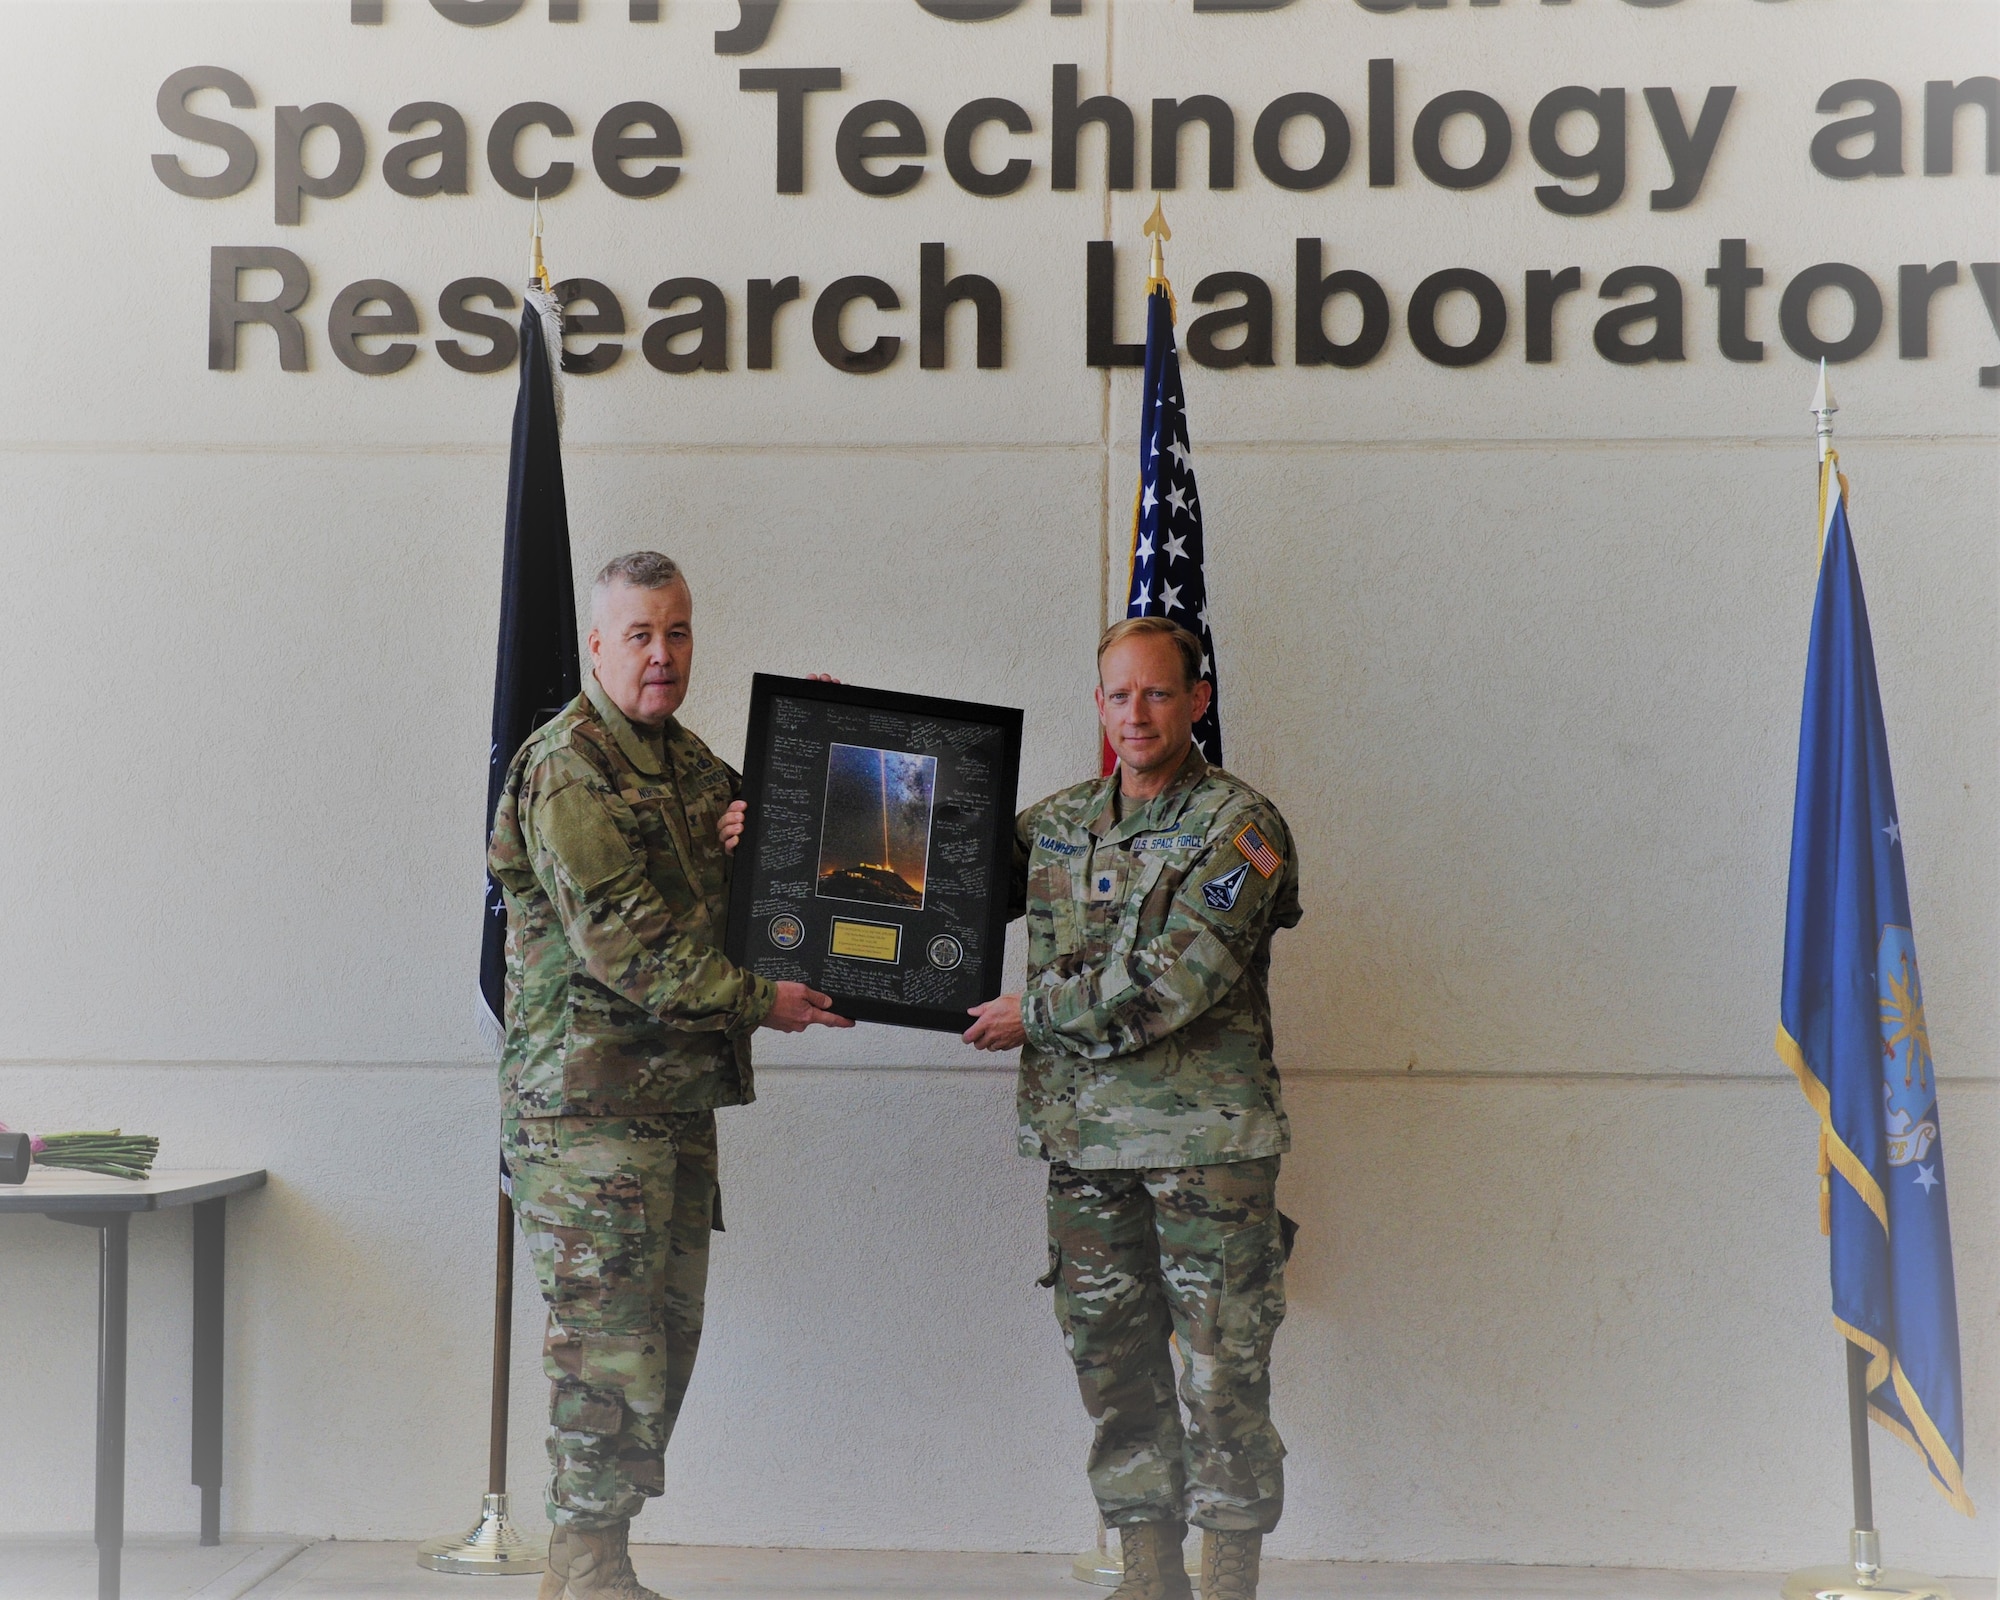 Col. Peter Norton, left, AFRL Space Electro-Optics Division chief presents Lt. Col. Steven Mawhorter a remembrance of the Starfire Optical Range at a transfer of leadership ceremony held at the SOR July 16. Mawhorter departed the SOR, located on Kirtland AFB, N.M. to take a position as the Space Warfighting Modeling and Simulation lead for the AFRL Space Vehicles Directorate at Kirtland. (U.S. Air Force photo/Capt. Thomas Dickinson)